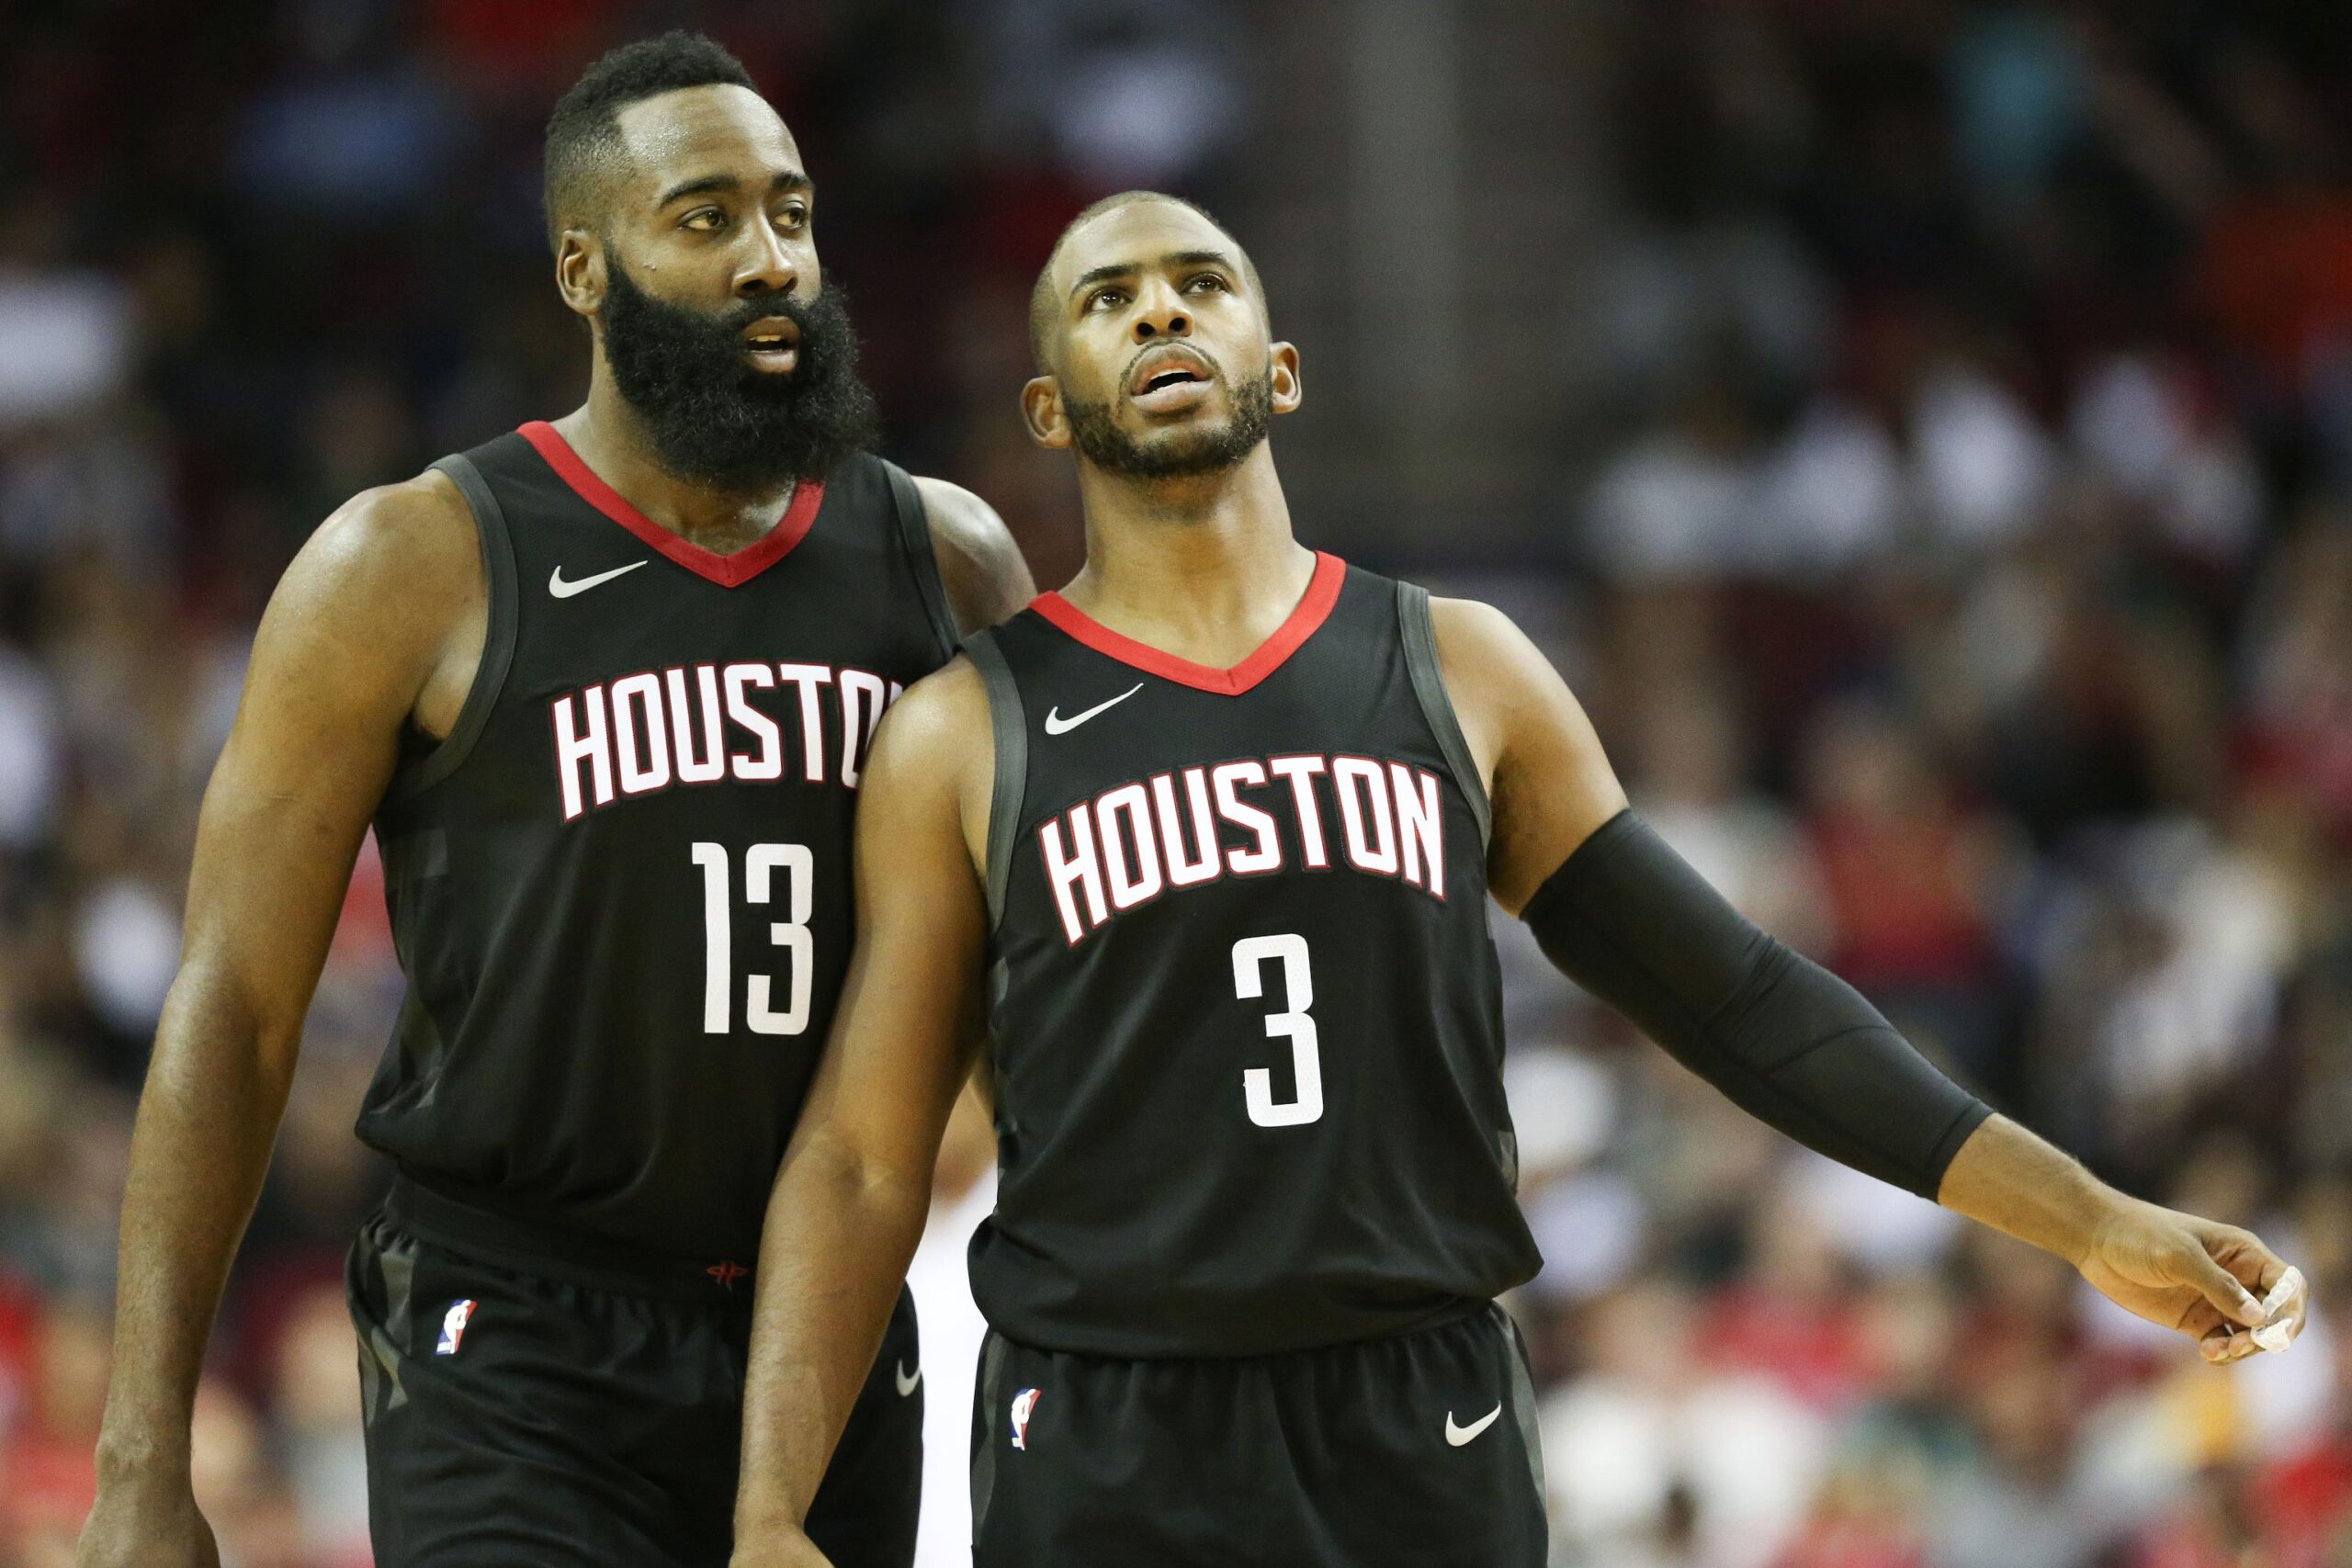 Chris Paul and James Harden